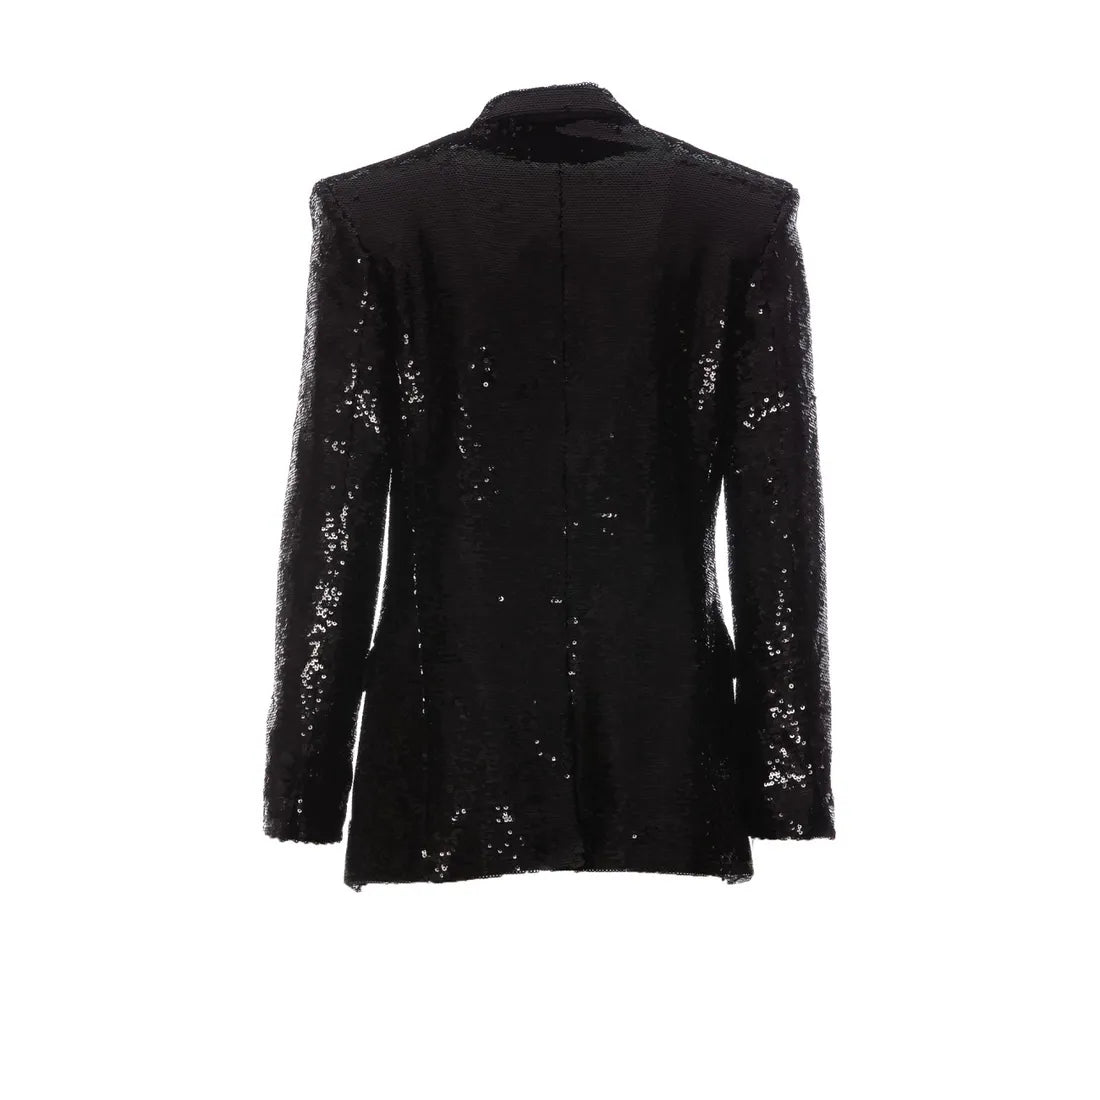 SEQUINED 6 BUTTONS JACKET WITH SATIN COLLAR SG045MD09EJI